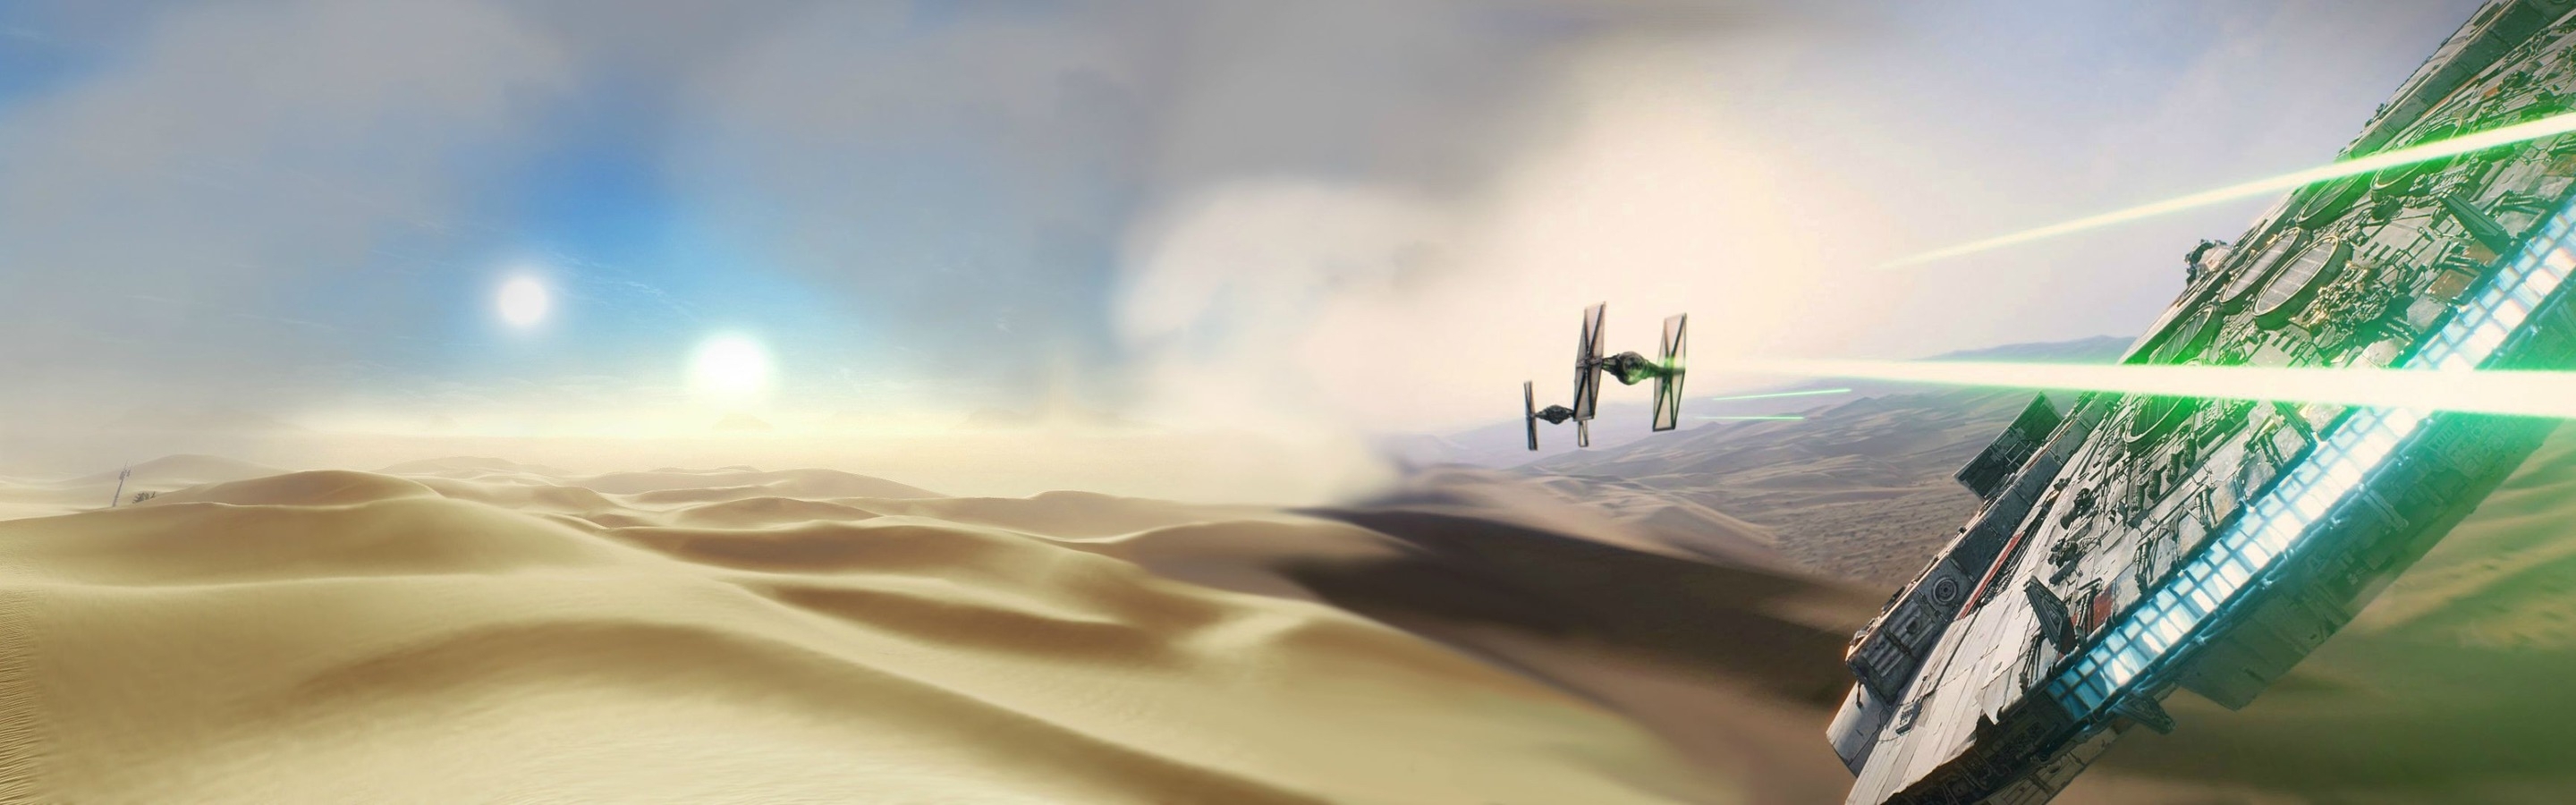 10 Latest Star Wars Dual Screen Wallpapers FULL HD 1920×1080 For PC